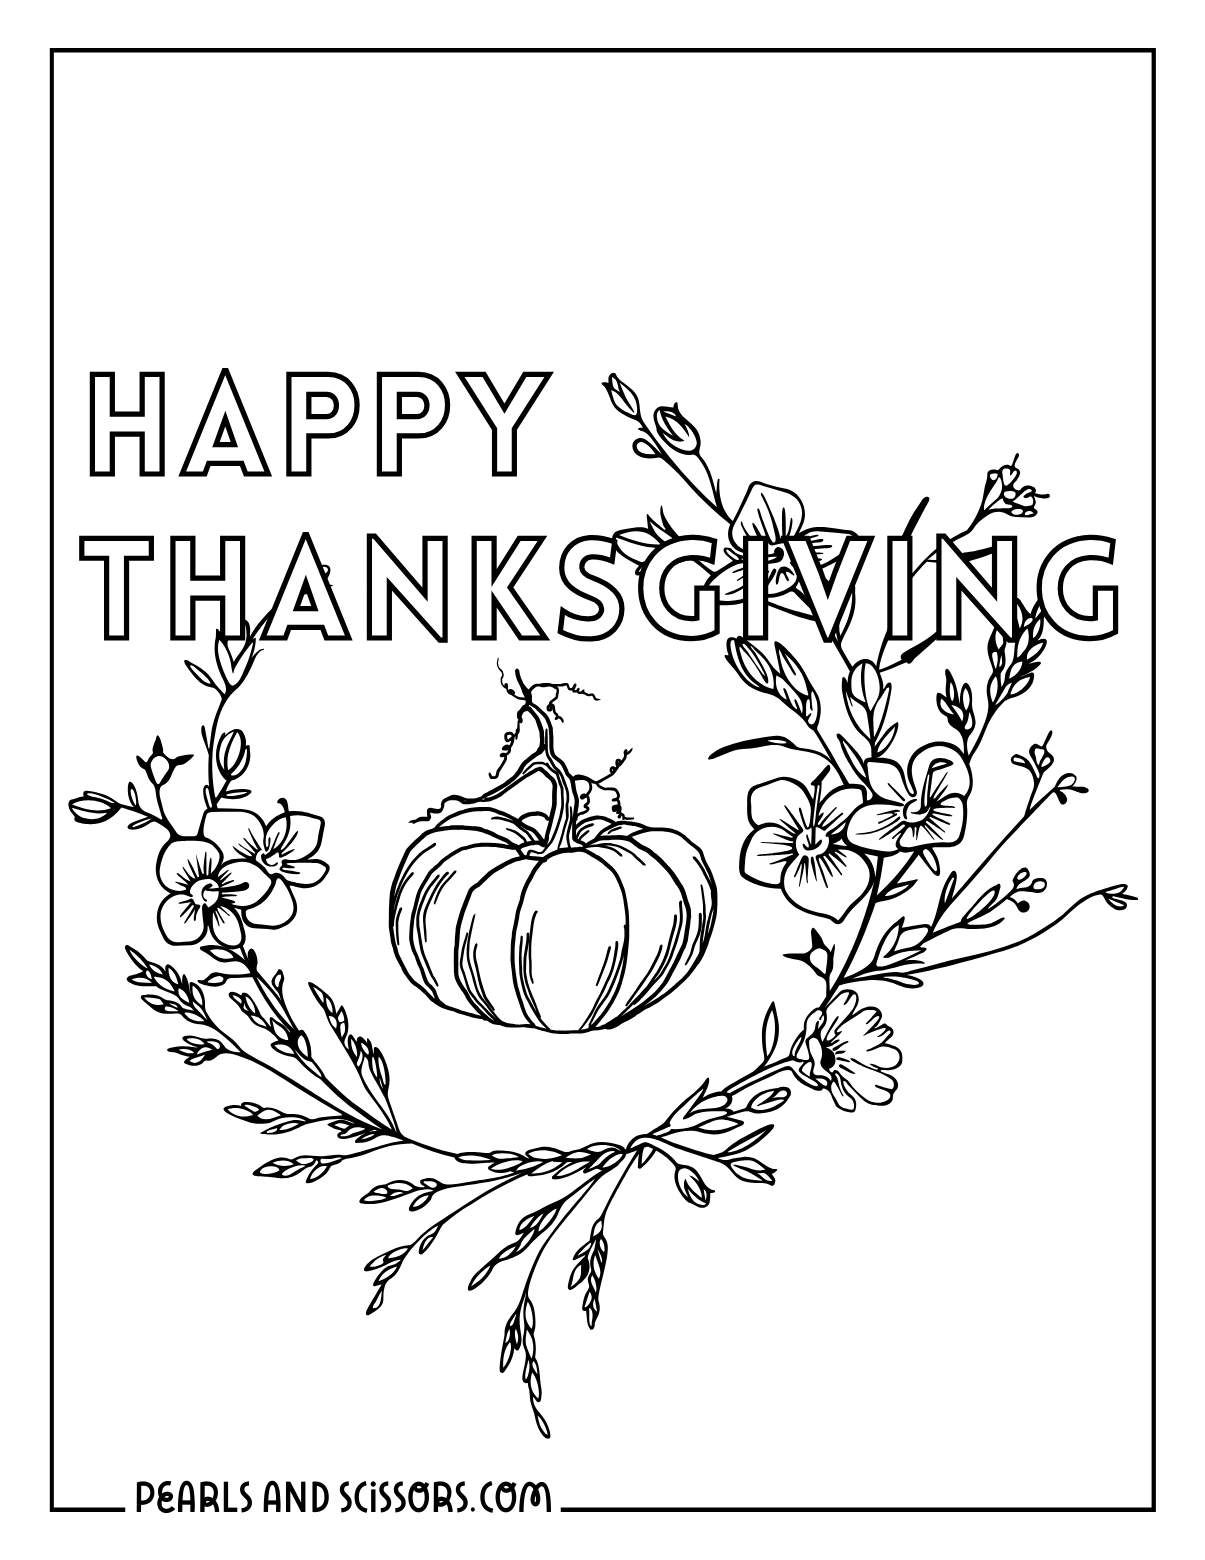 Detailed harvest wreath thanksgiving coloring page.